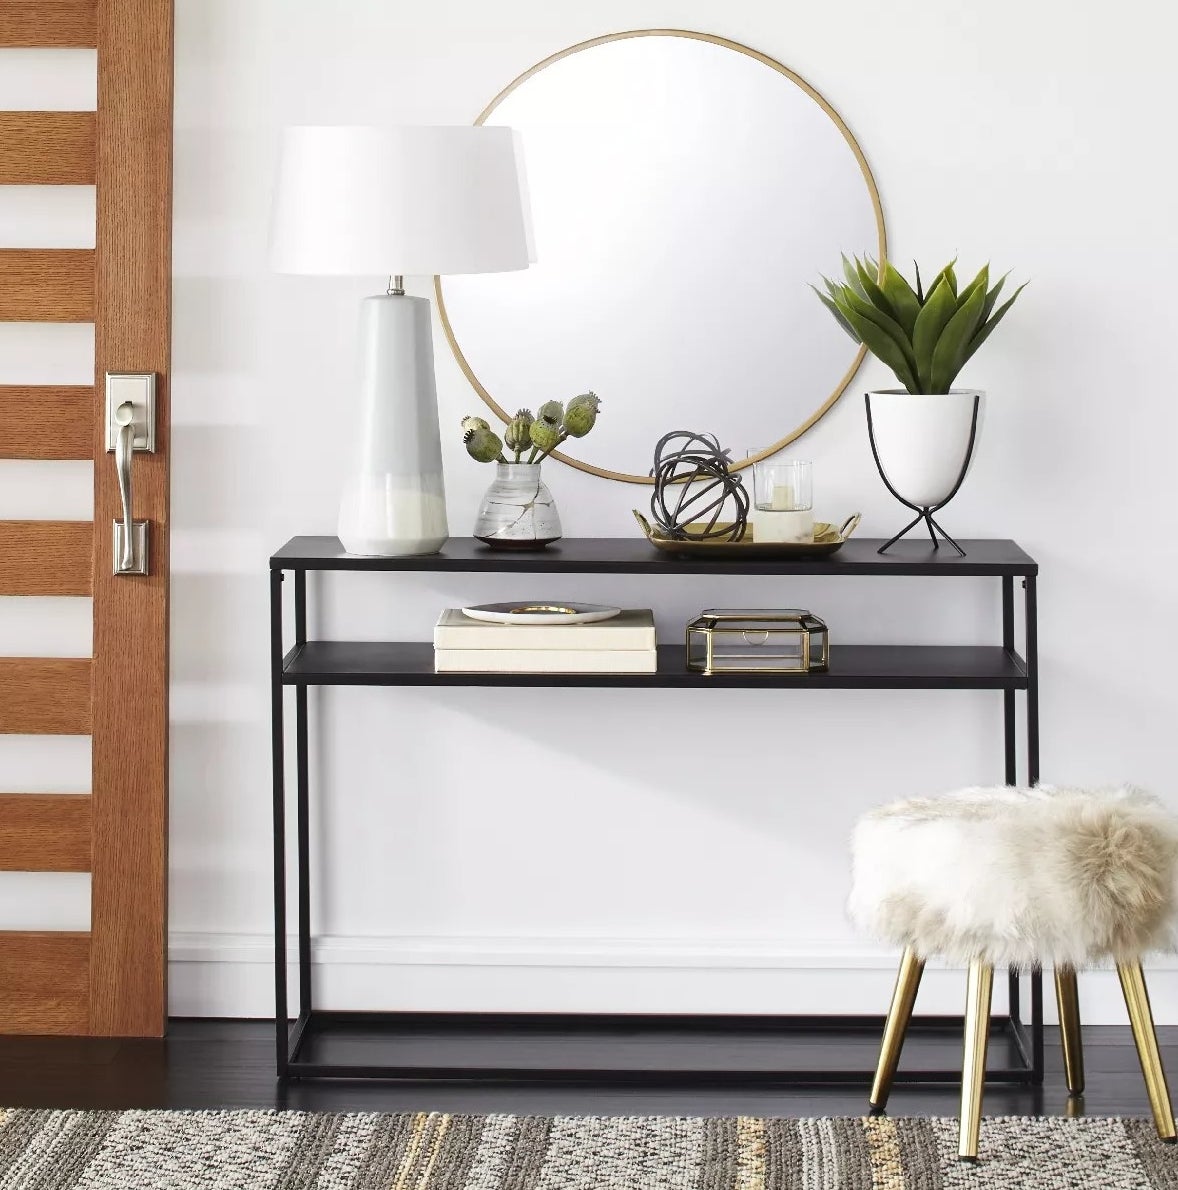 The narrow metal console with two open shelves in an entryway